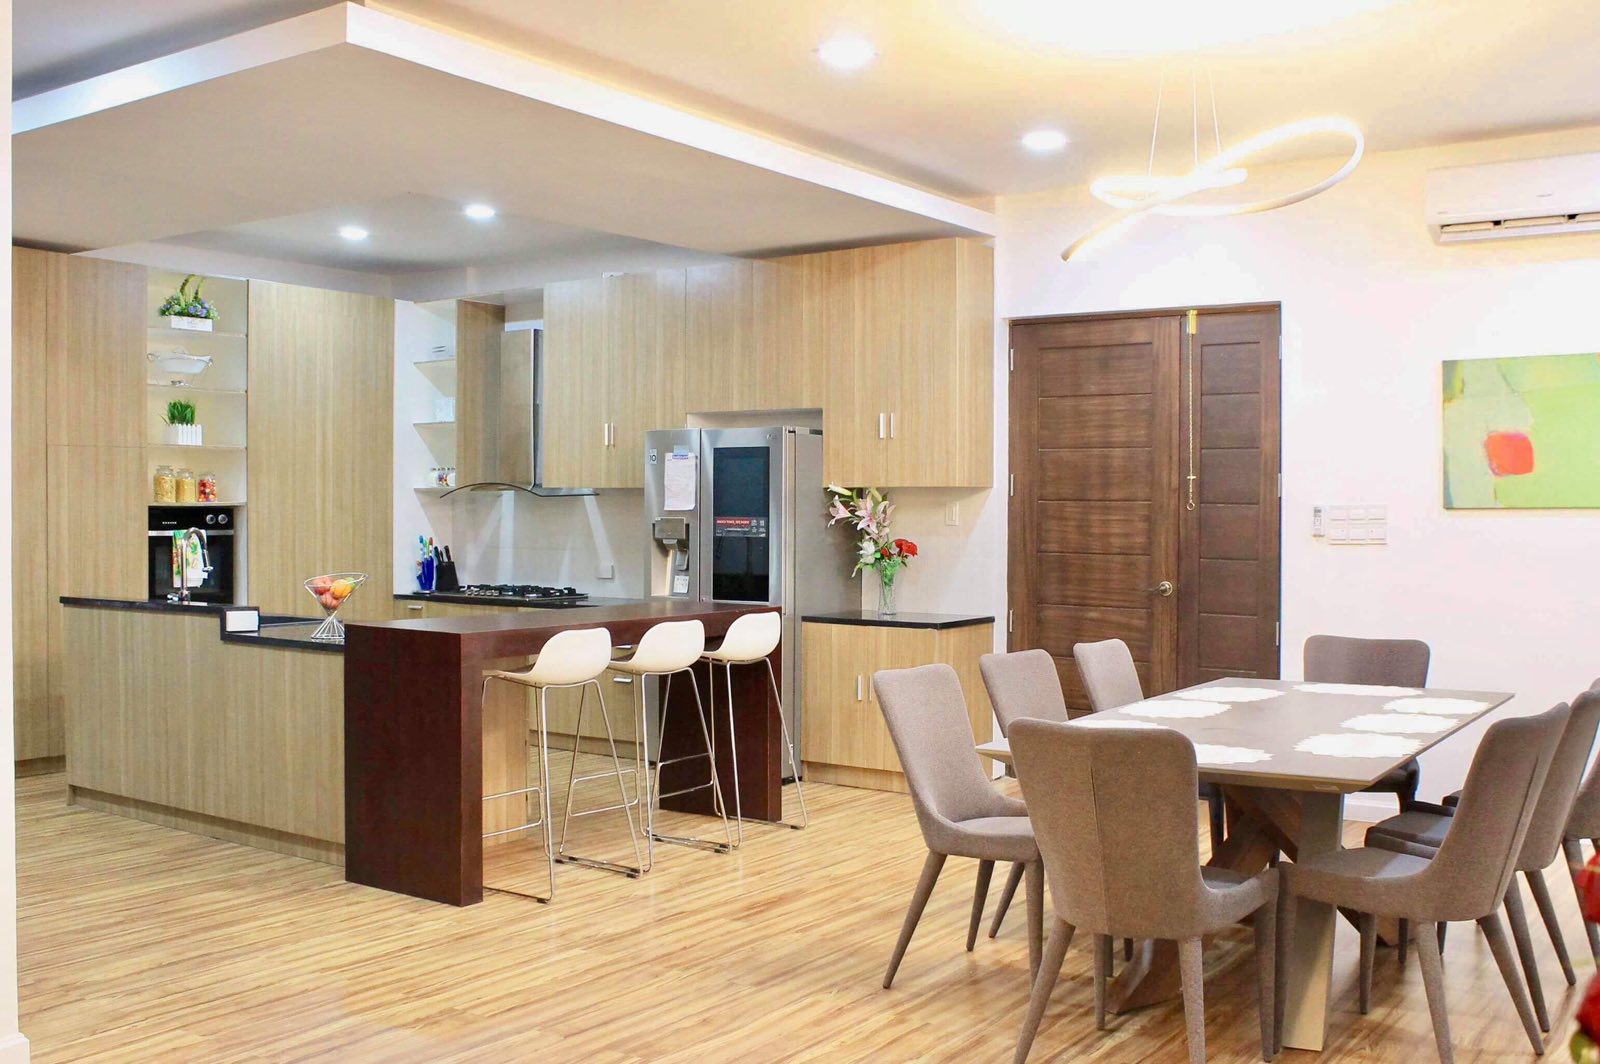 6BR House For Rent, Greenwoods Executive Village, Pasig City